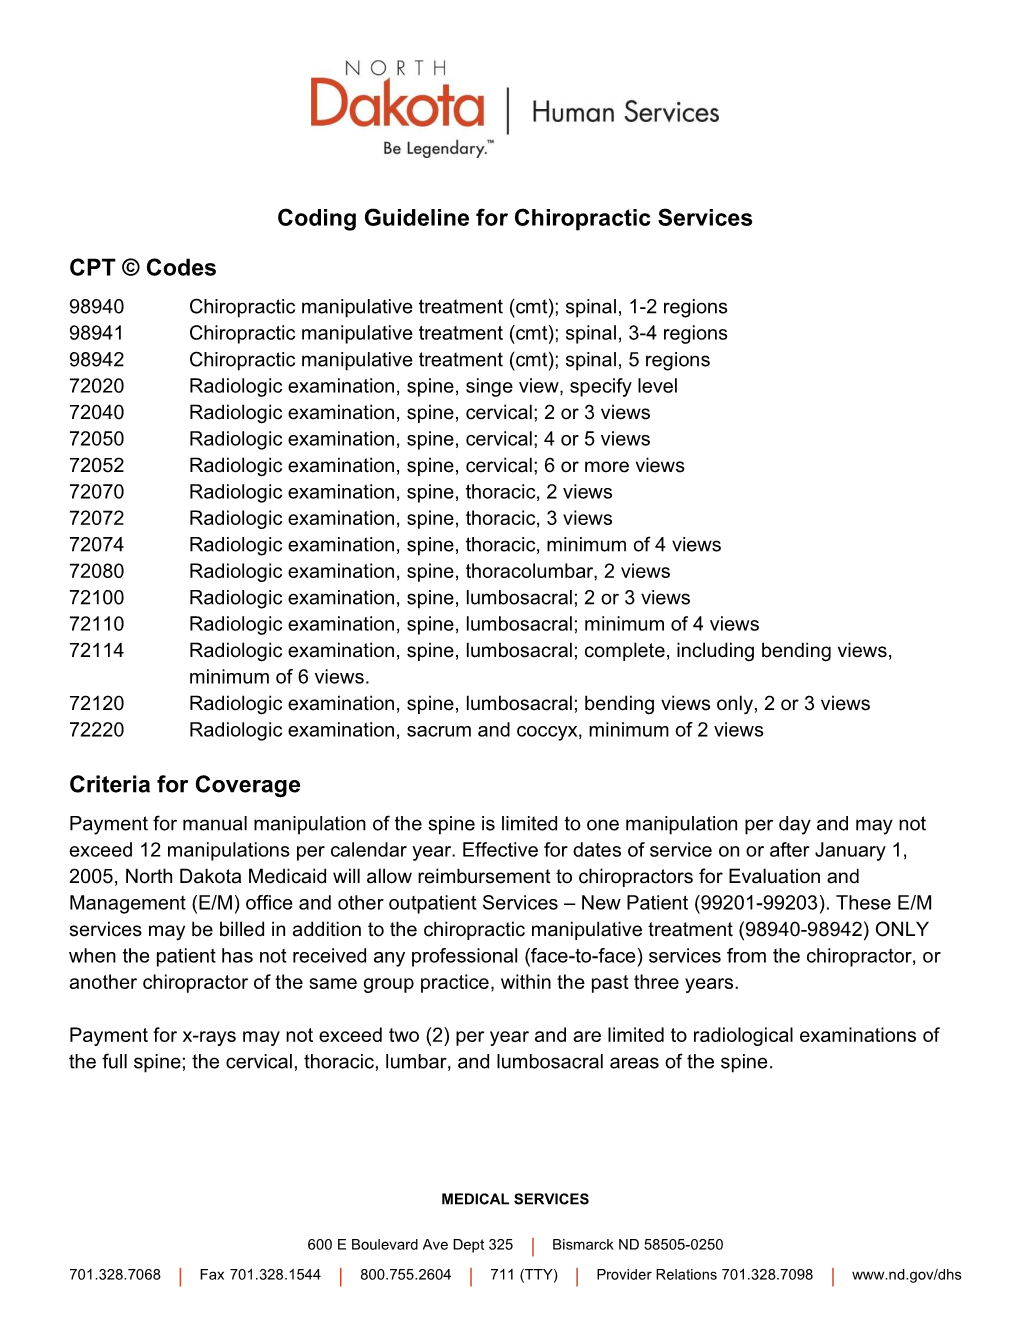 Coding Guideline for Chiropractic Services CPT © Codes Criteria For